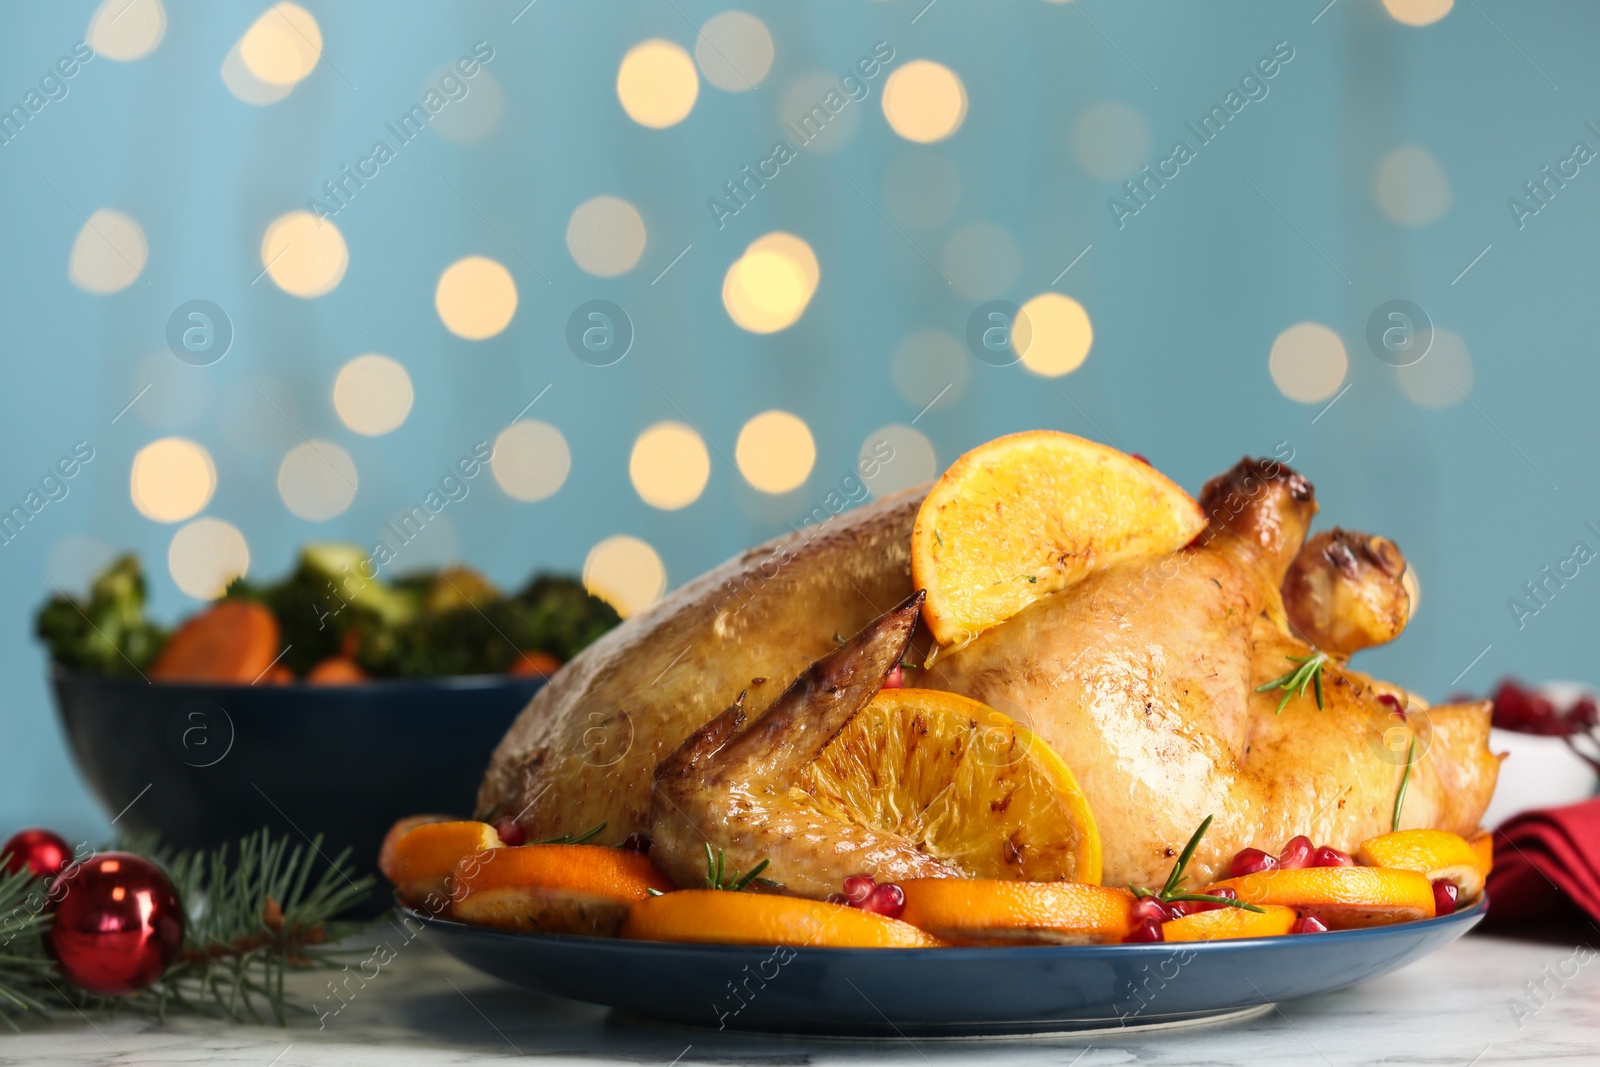 Photo of Delicious chicken with oranges and pomegranate on white table against blurred festive lights